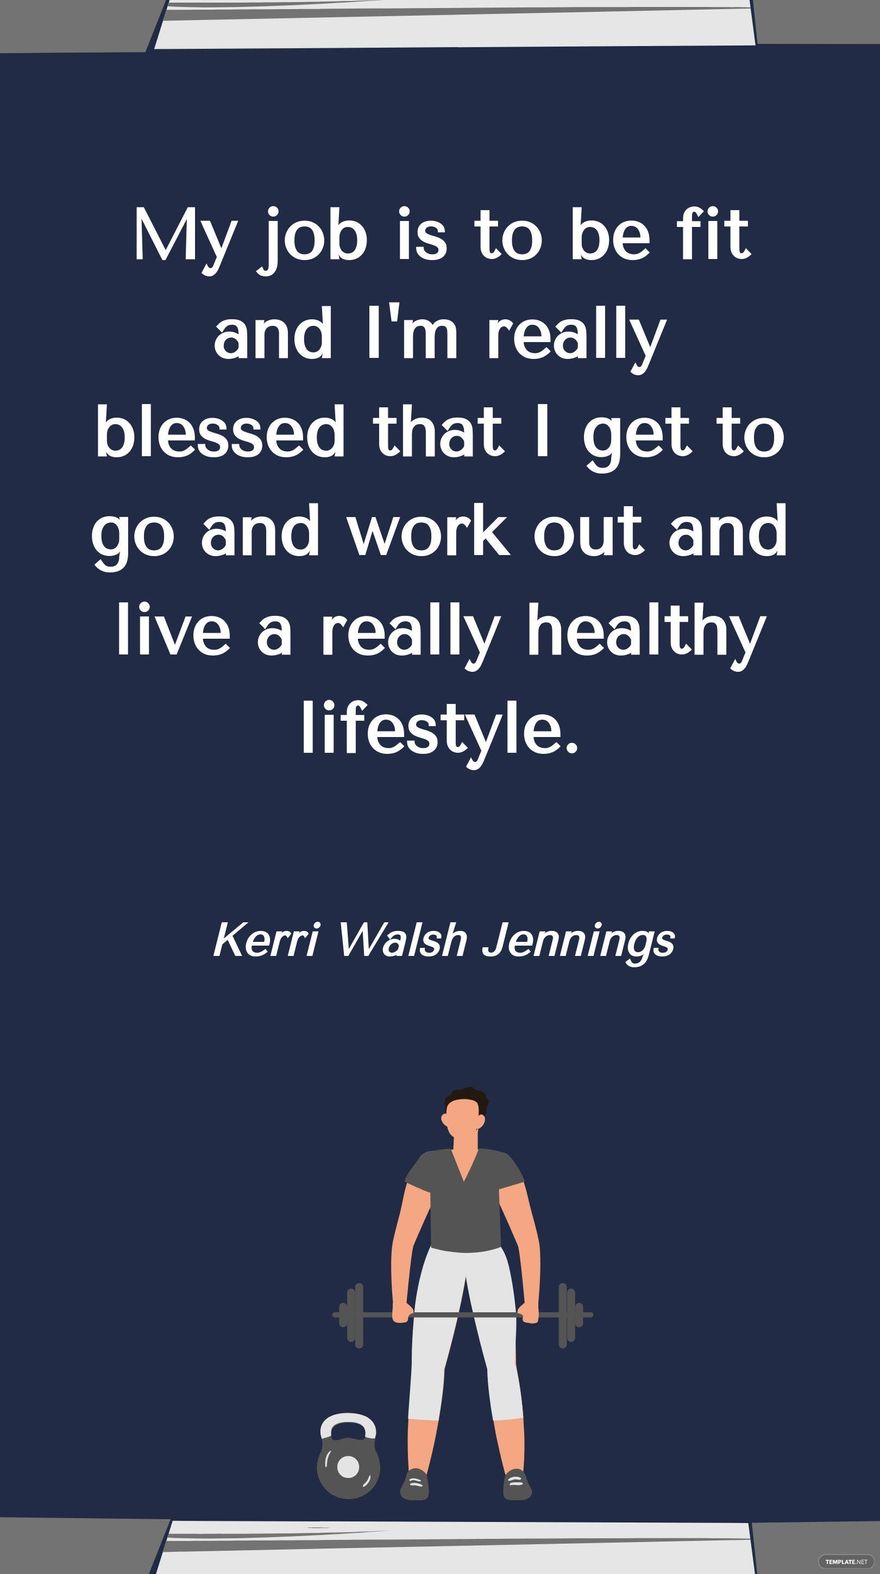 Kerri Walsh Jennings - My job is to be fit and I'm really blessed that I get to go and work out and live a really healthy lifestyle.